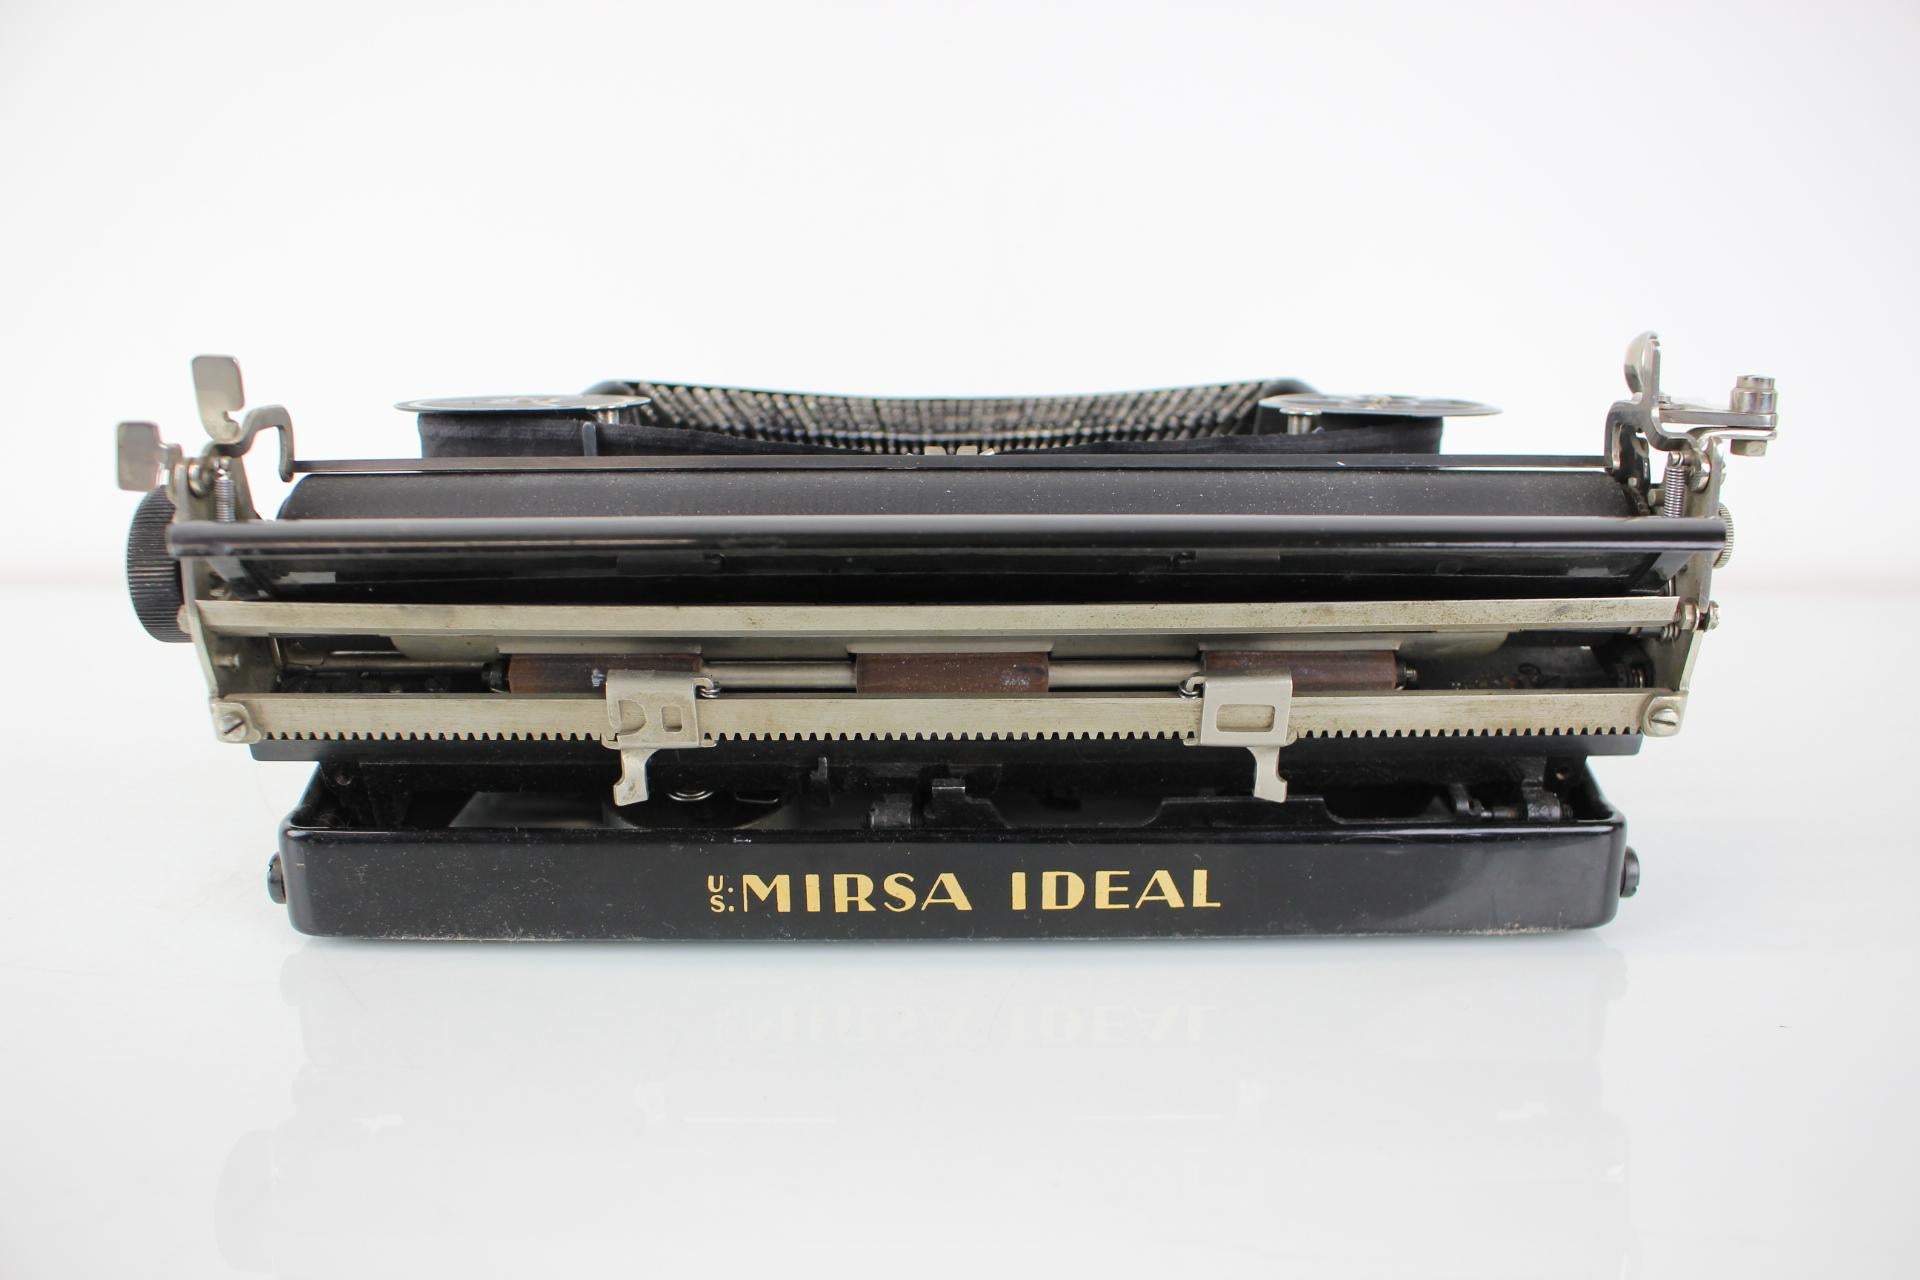 Mid-20th Century Typewriter Mirsa Ideal by Seidl and Naumann - Dresden - Germany, 1934 For Sale